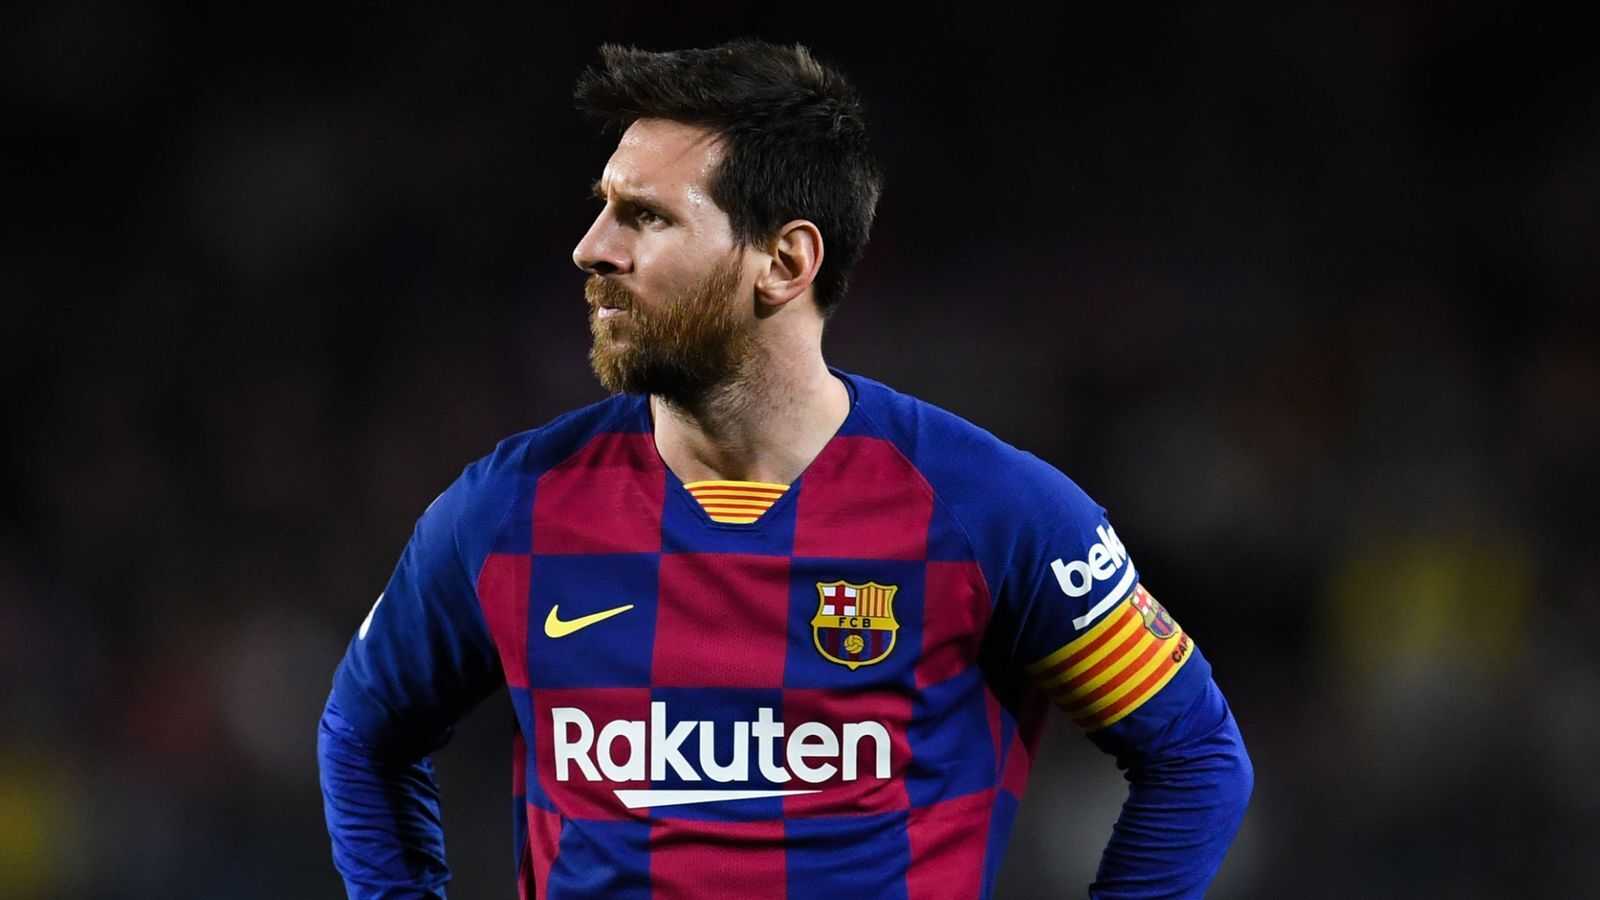 Lionel Messi can make the difference whenever he wants: Mallorca coach